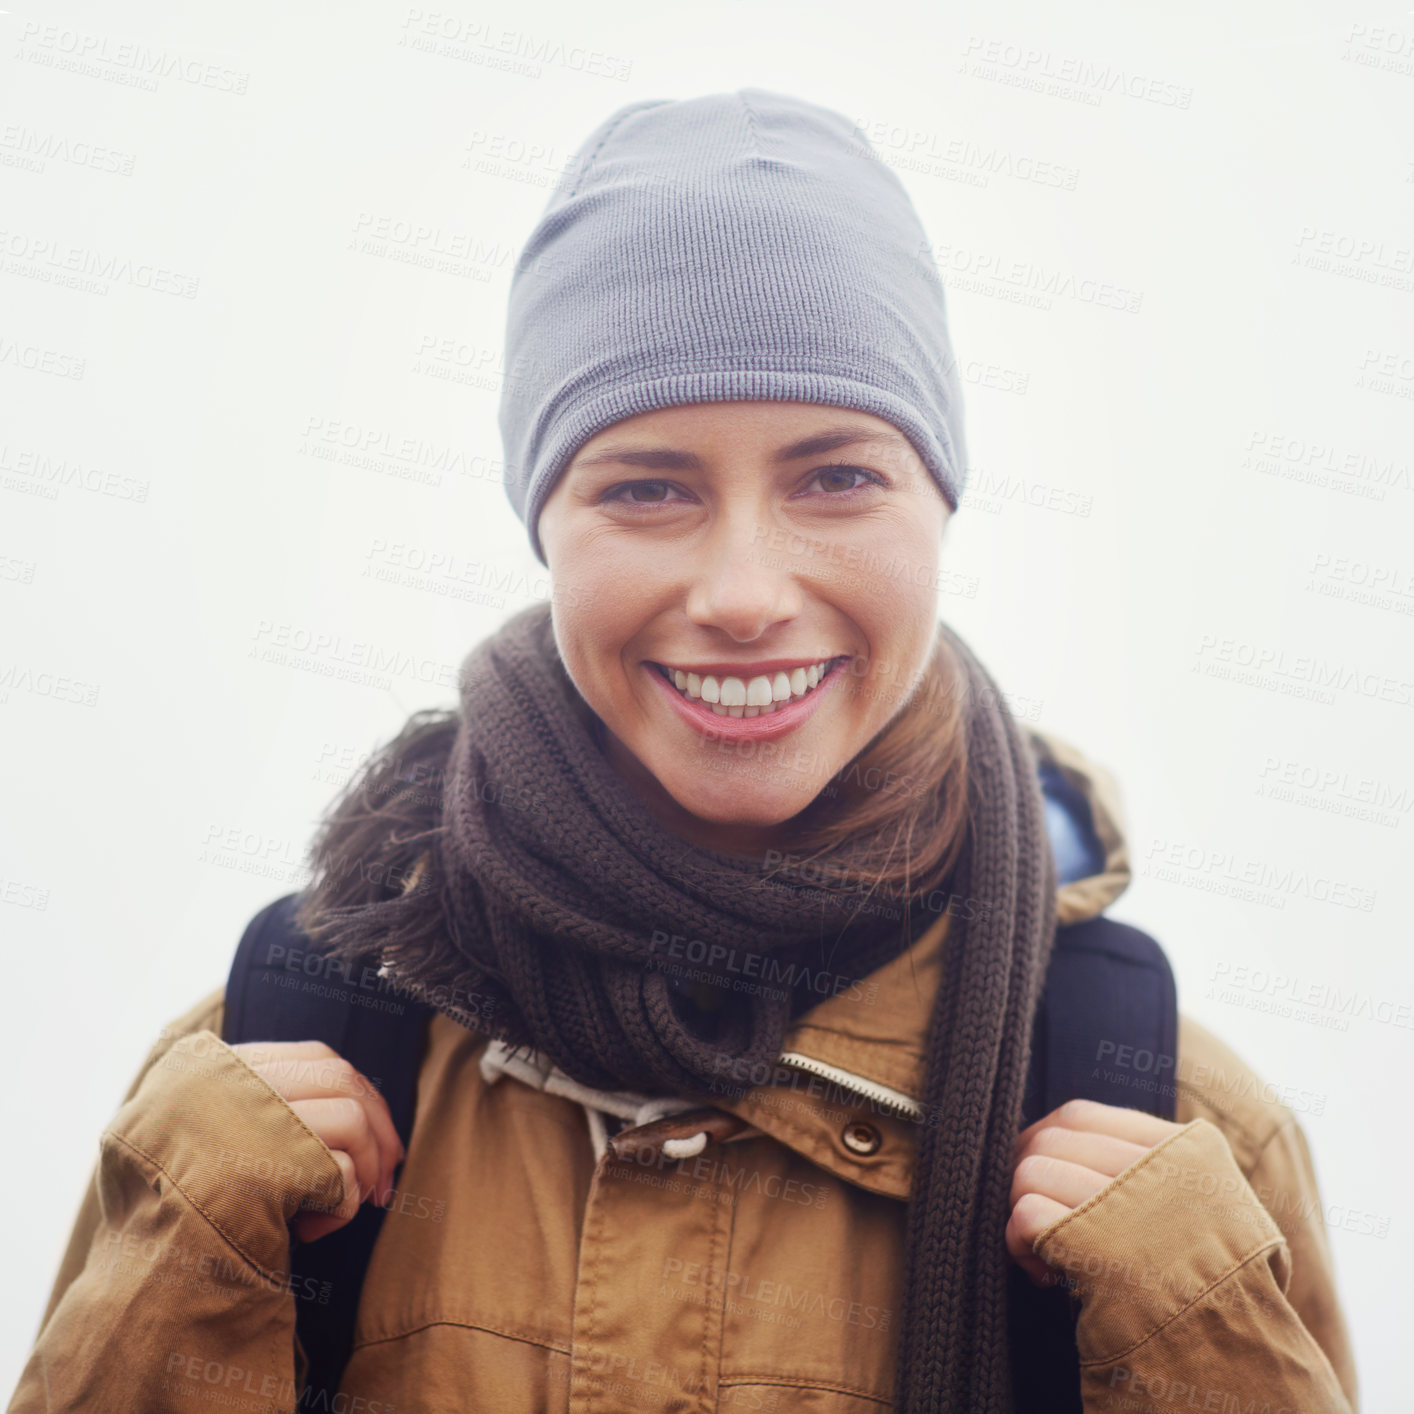 Buy stock photo Closeup portrait of an attractive young woman out hiking on an overcast day